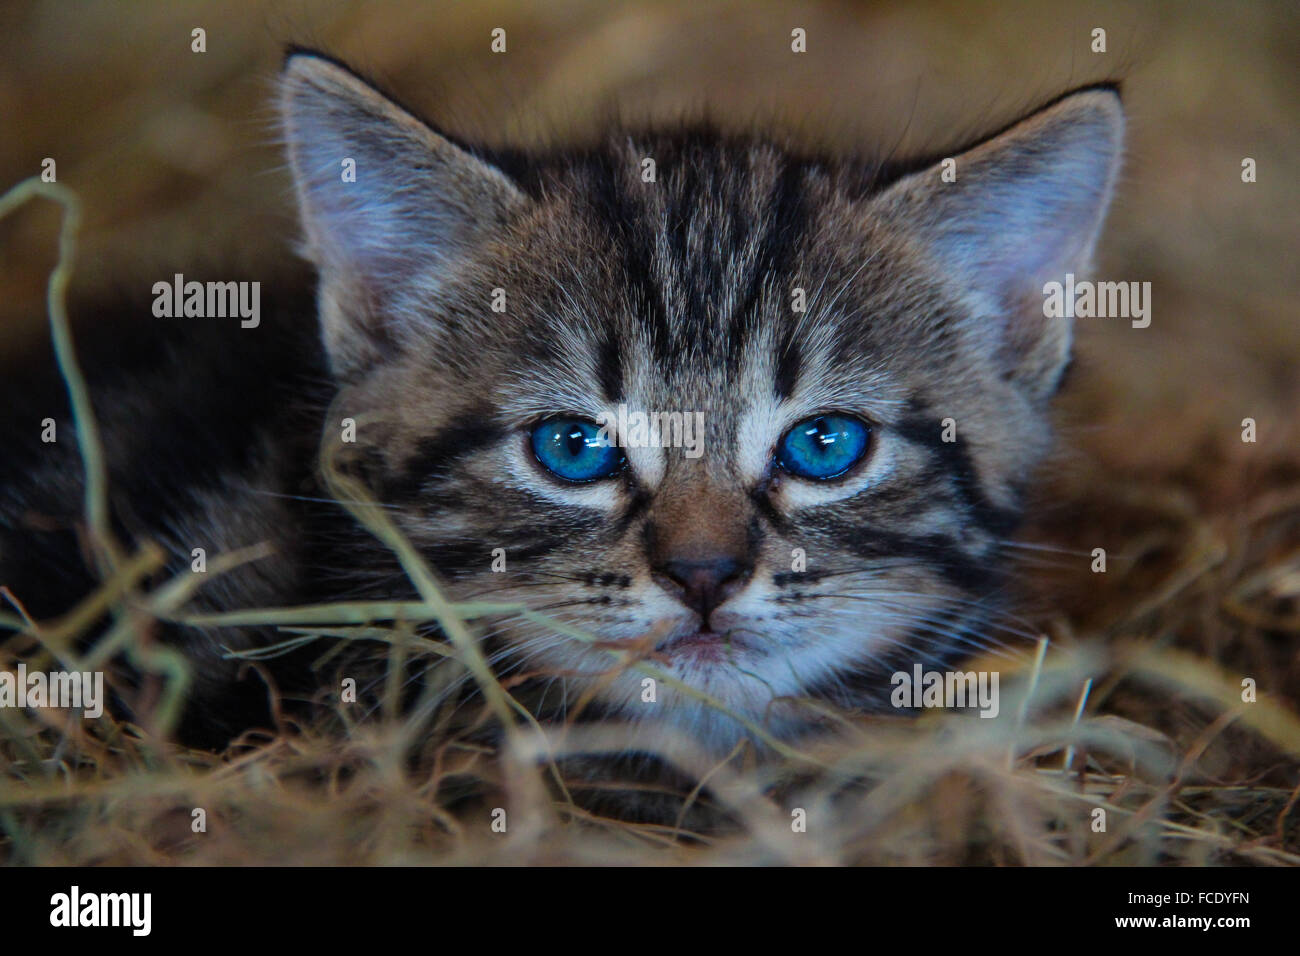 Close-Up Of Kitten Relaxing On Dry Grass Stock Photo